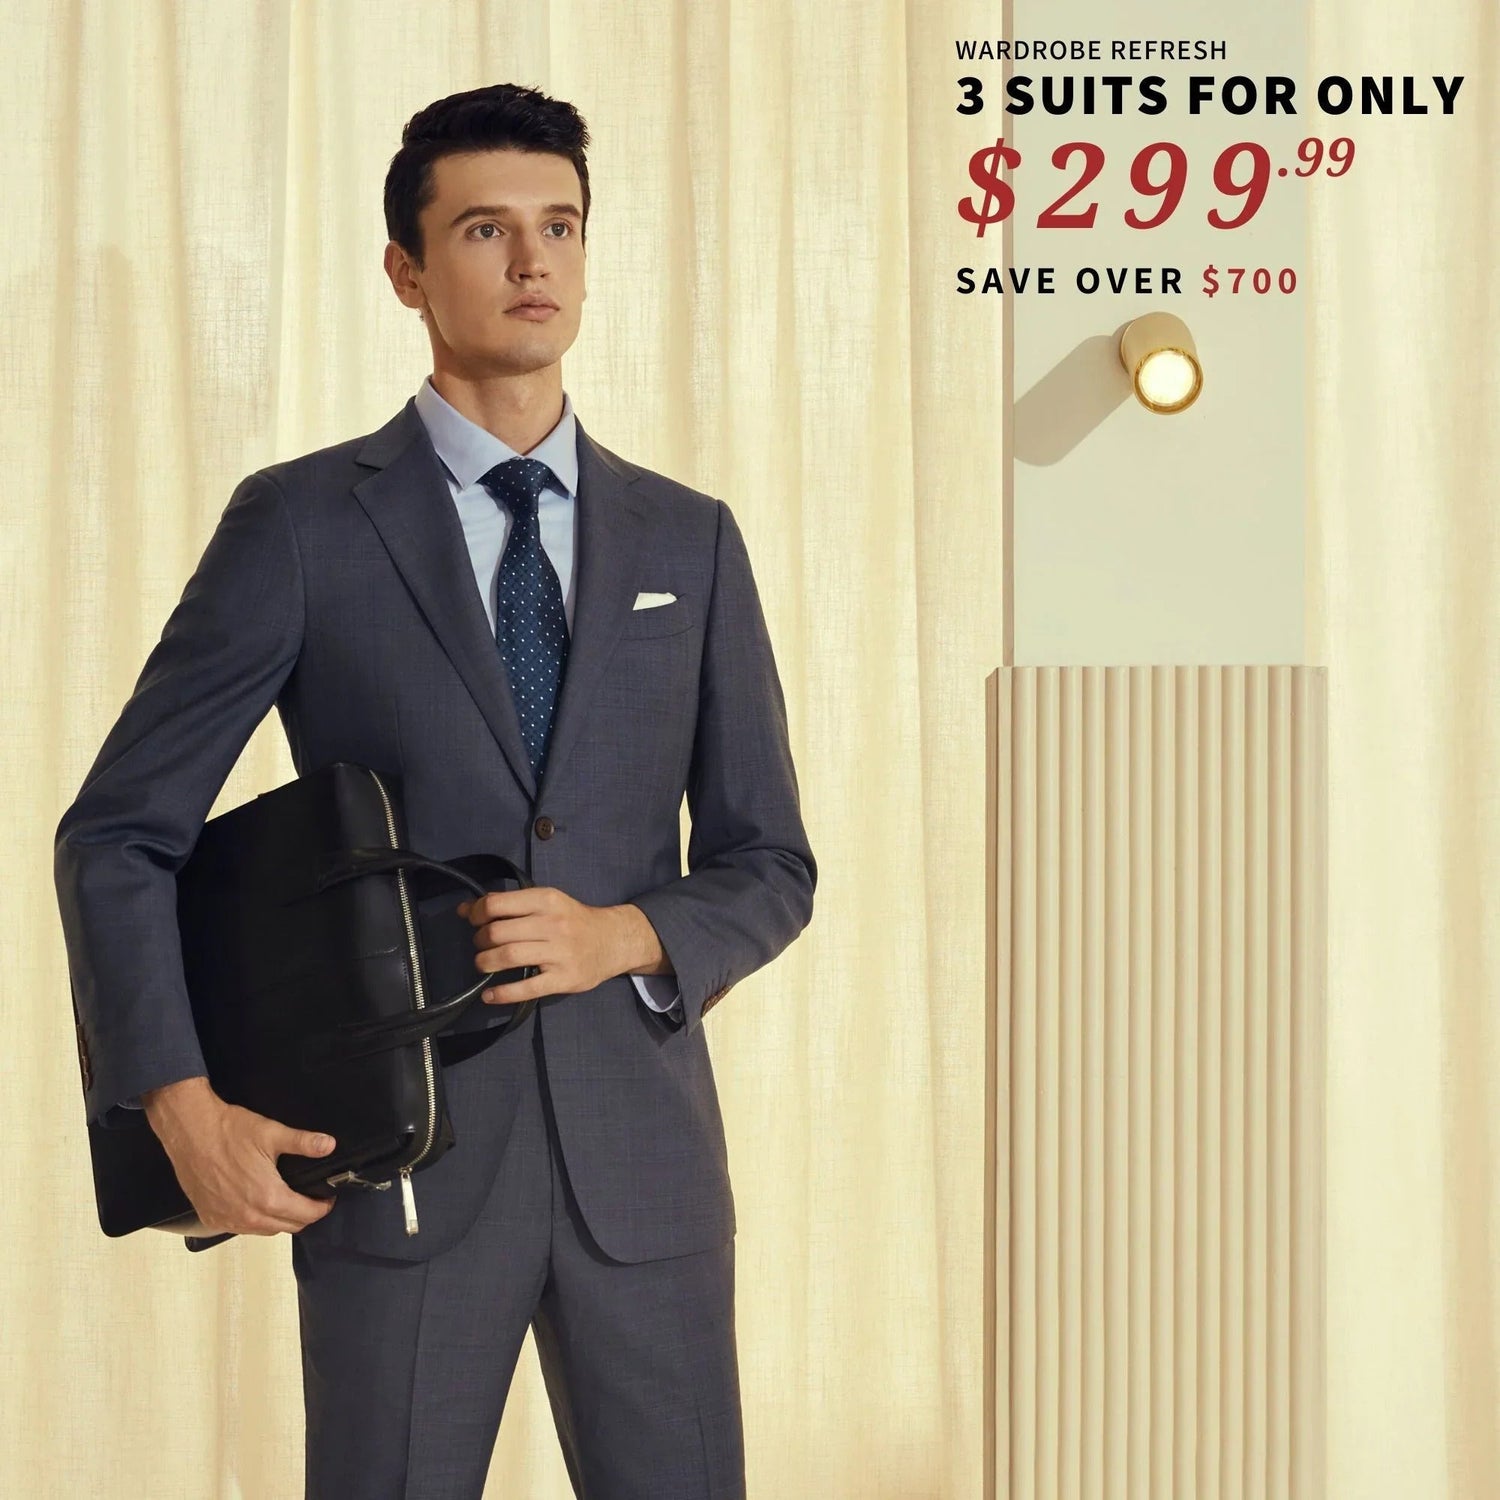 A man in a suit is holding a briefcase, his BYOB 3 Suits for $299 size perfectly tailored to his body.